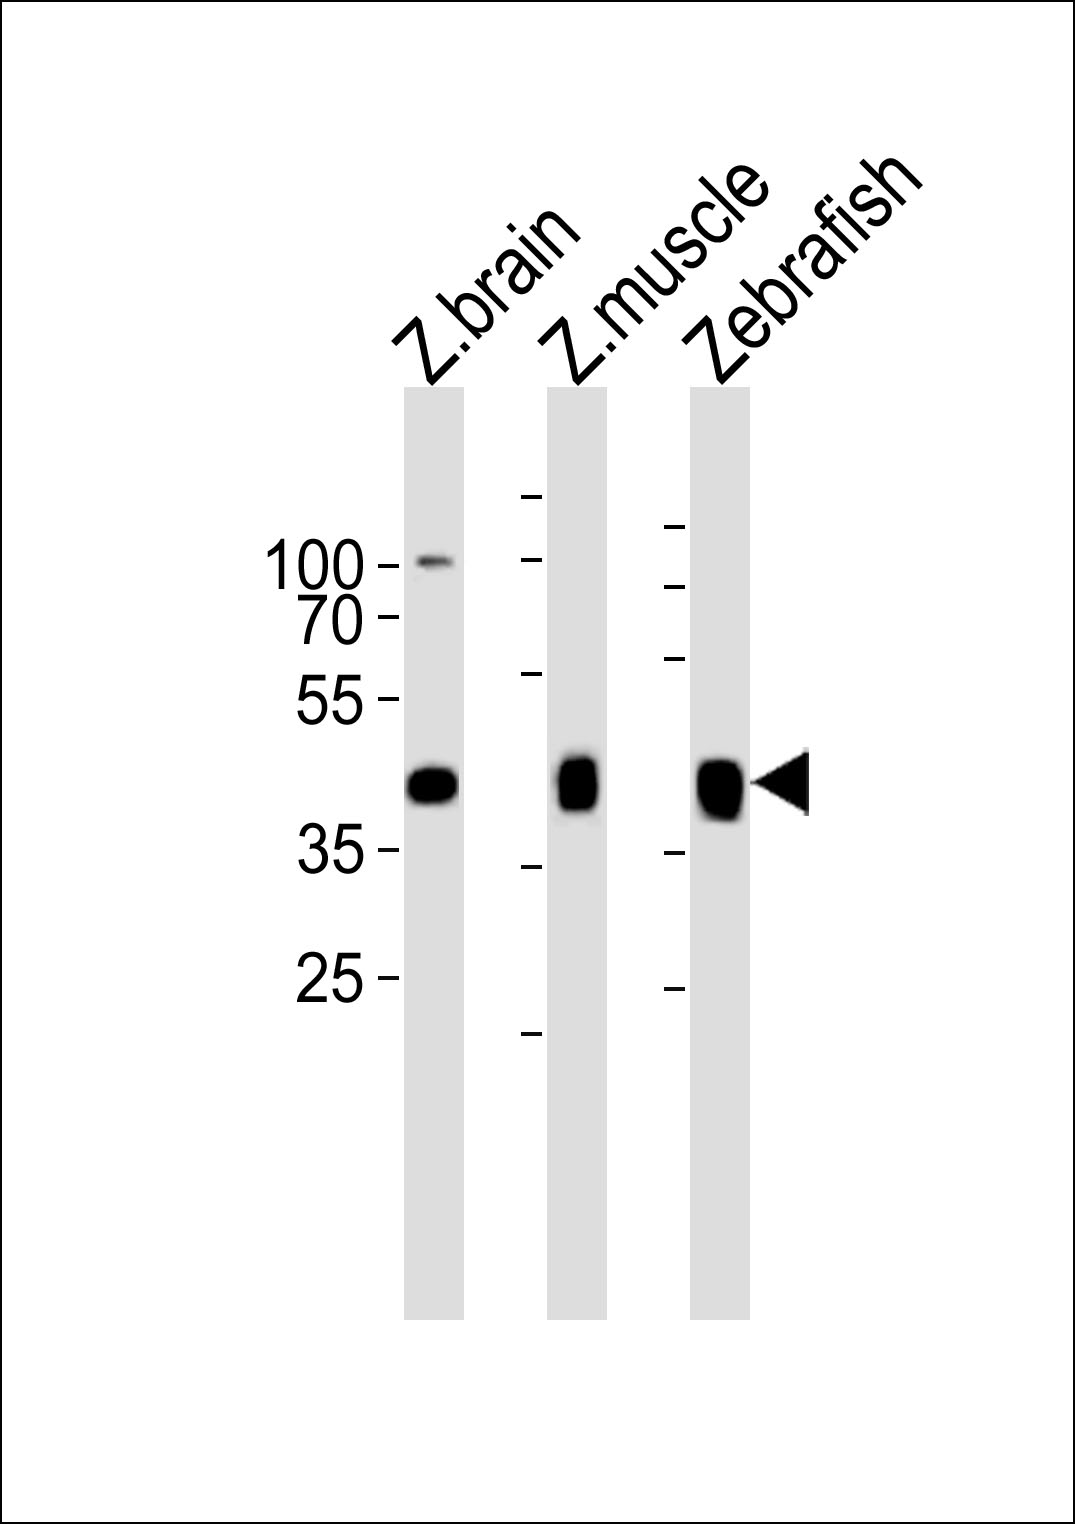 Western blot analysis of lysates from zebra fish brain,  zebra fish muscle, Zebrafish tissue lysate (from left to right), using (DANRE) mylipb Antibody (C-term)(Cat. #Azb18718c).   Azb18718c was diluted at 1:1000 at each lane.   A goat anti-rabbit IgG H&L(HRP) at 1:10000 dilution was used as the secondary antibody.  Lysates at 35ug per lane.